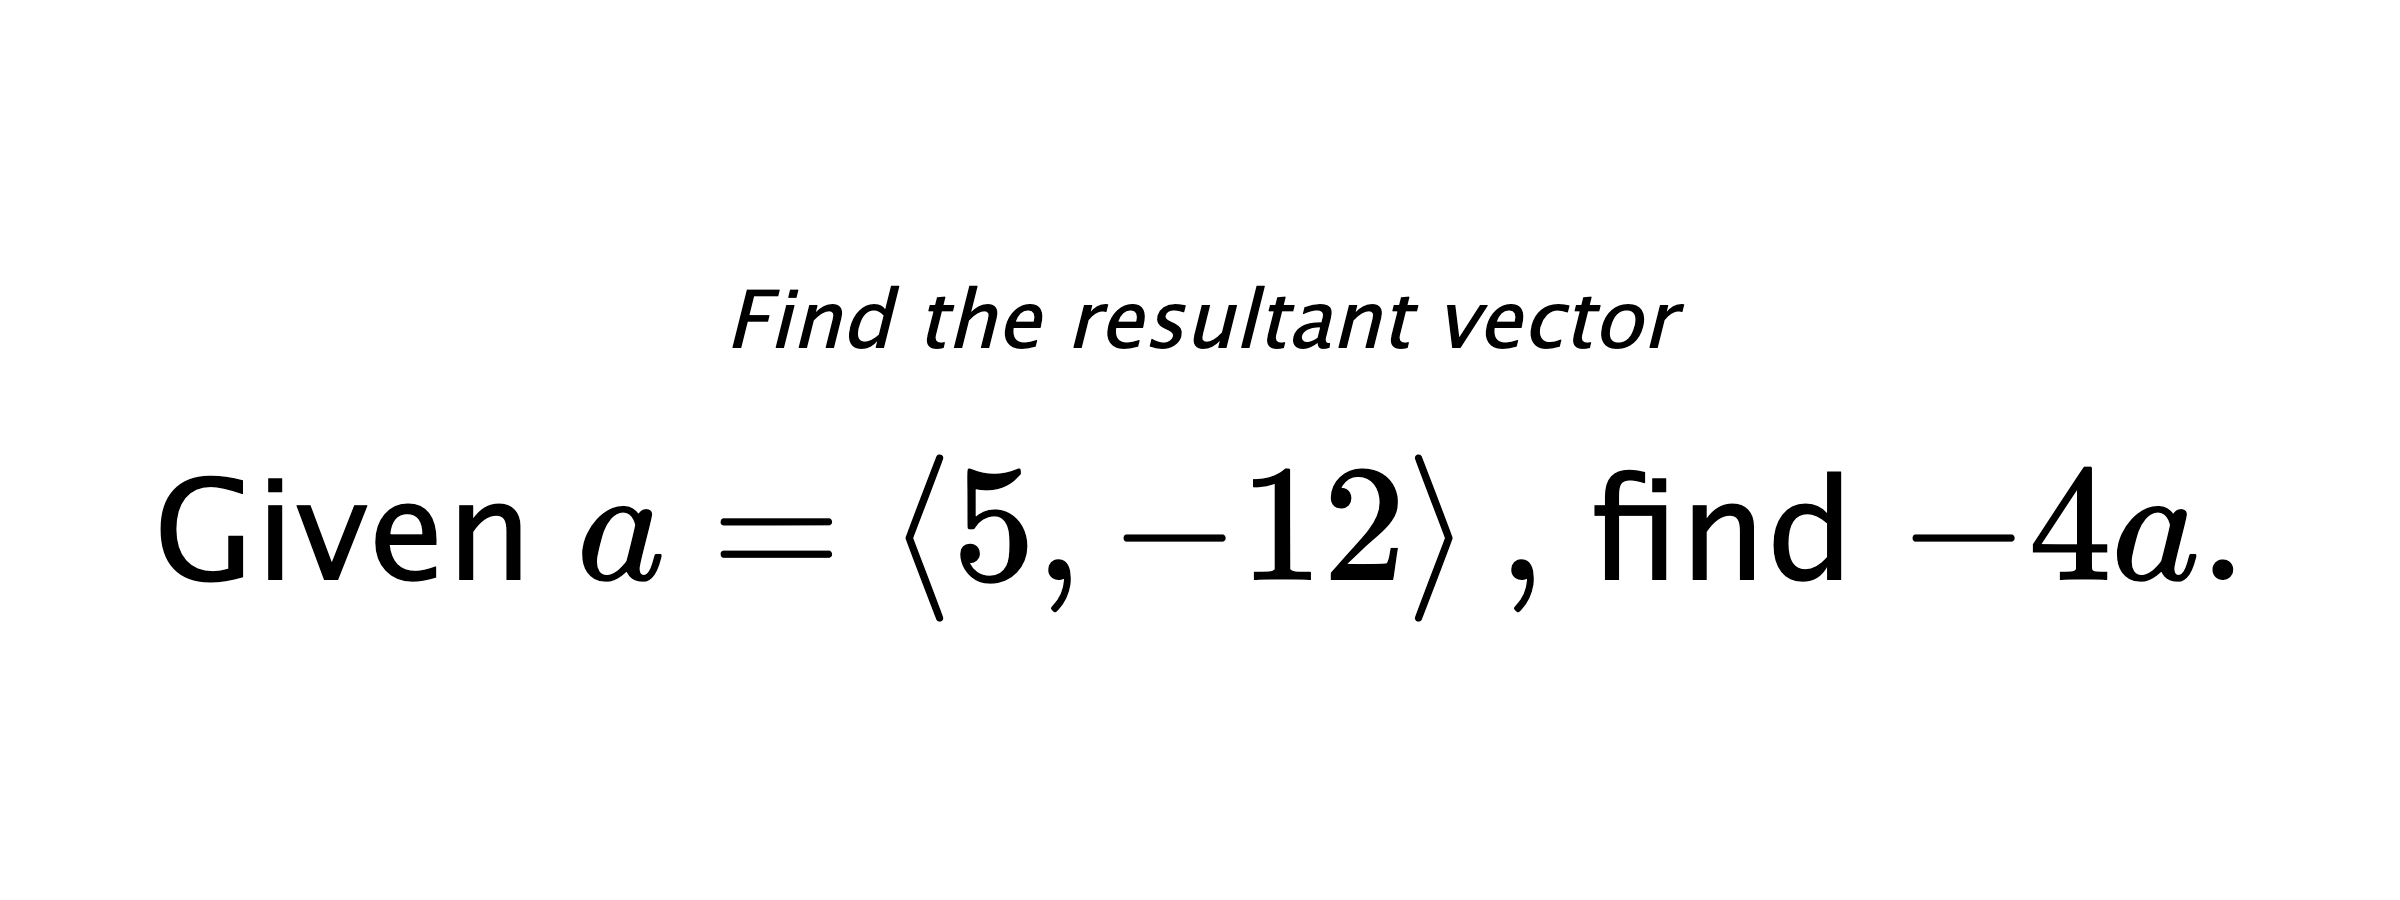 Find the resultant vector Given $ a = \left< 5,-12 \right> ,$ find $ -4a .$